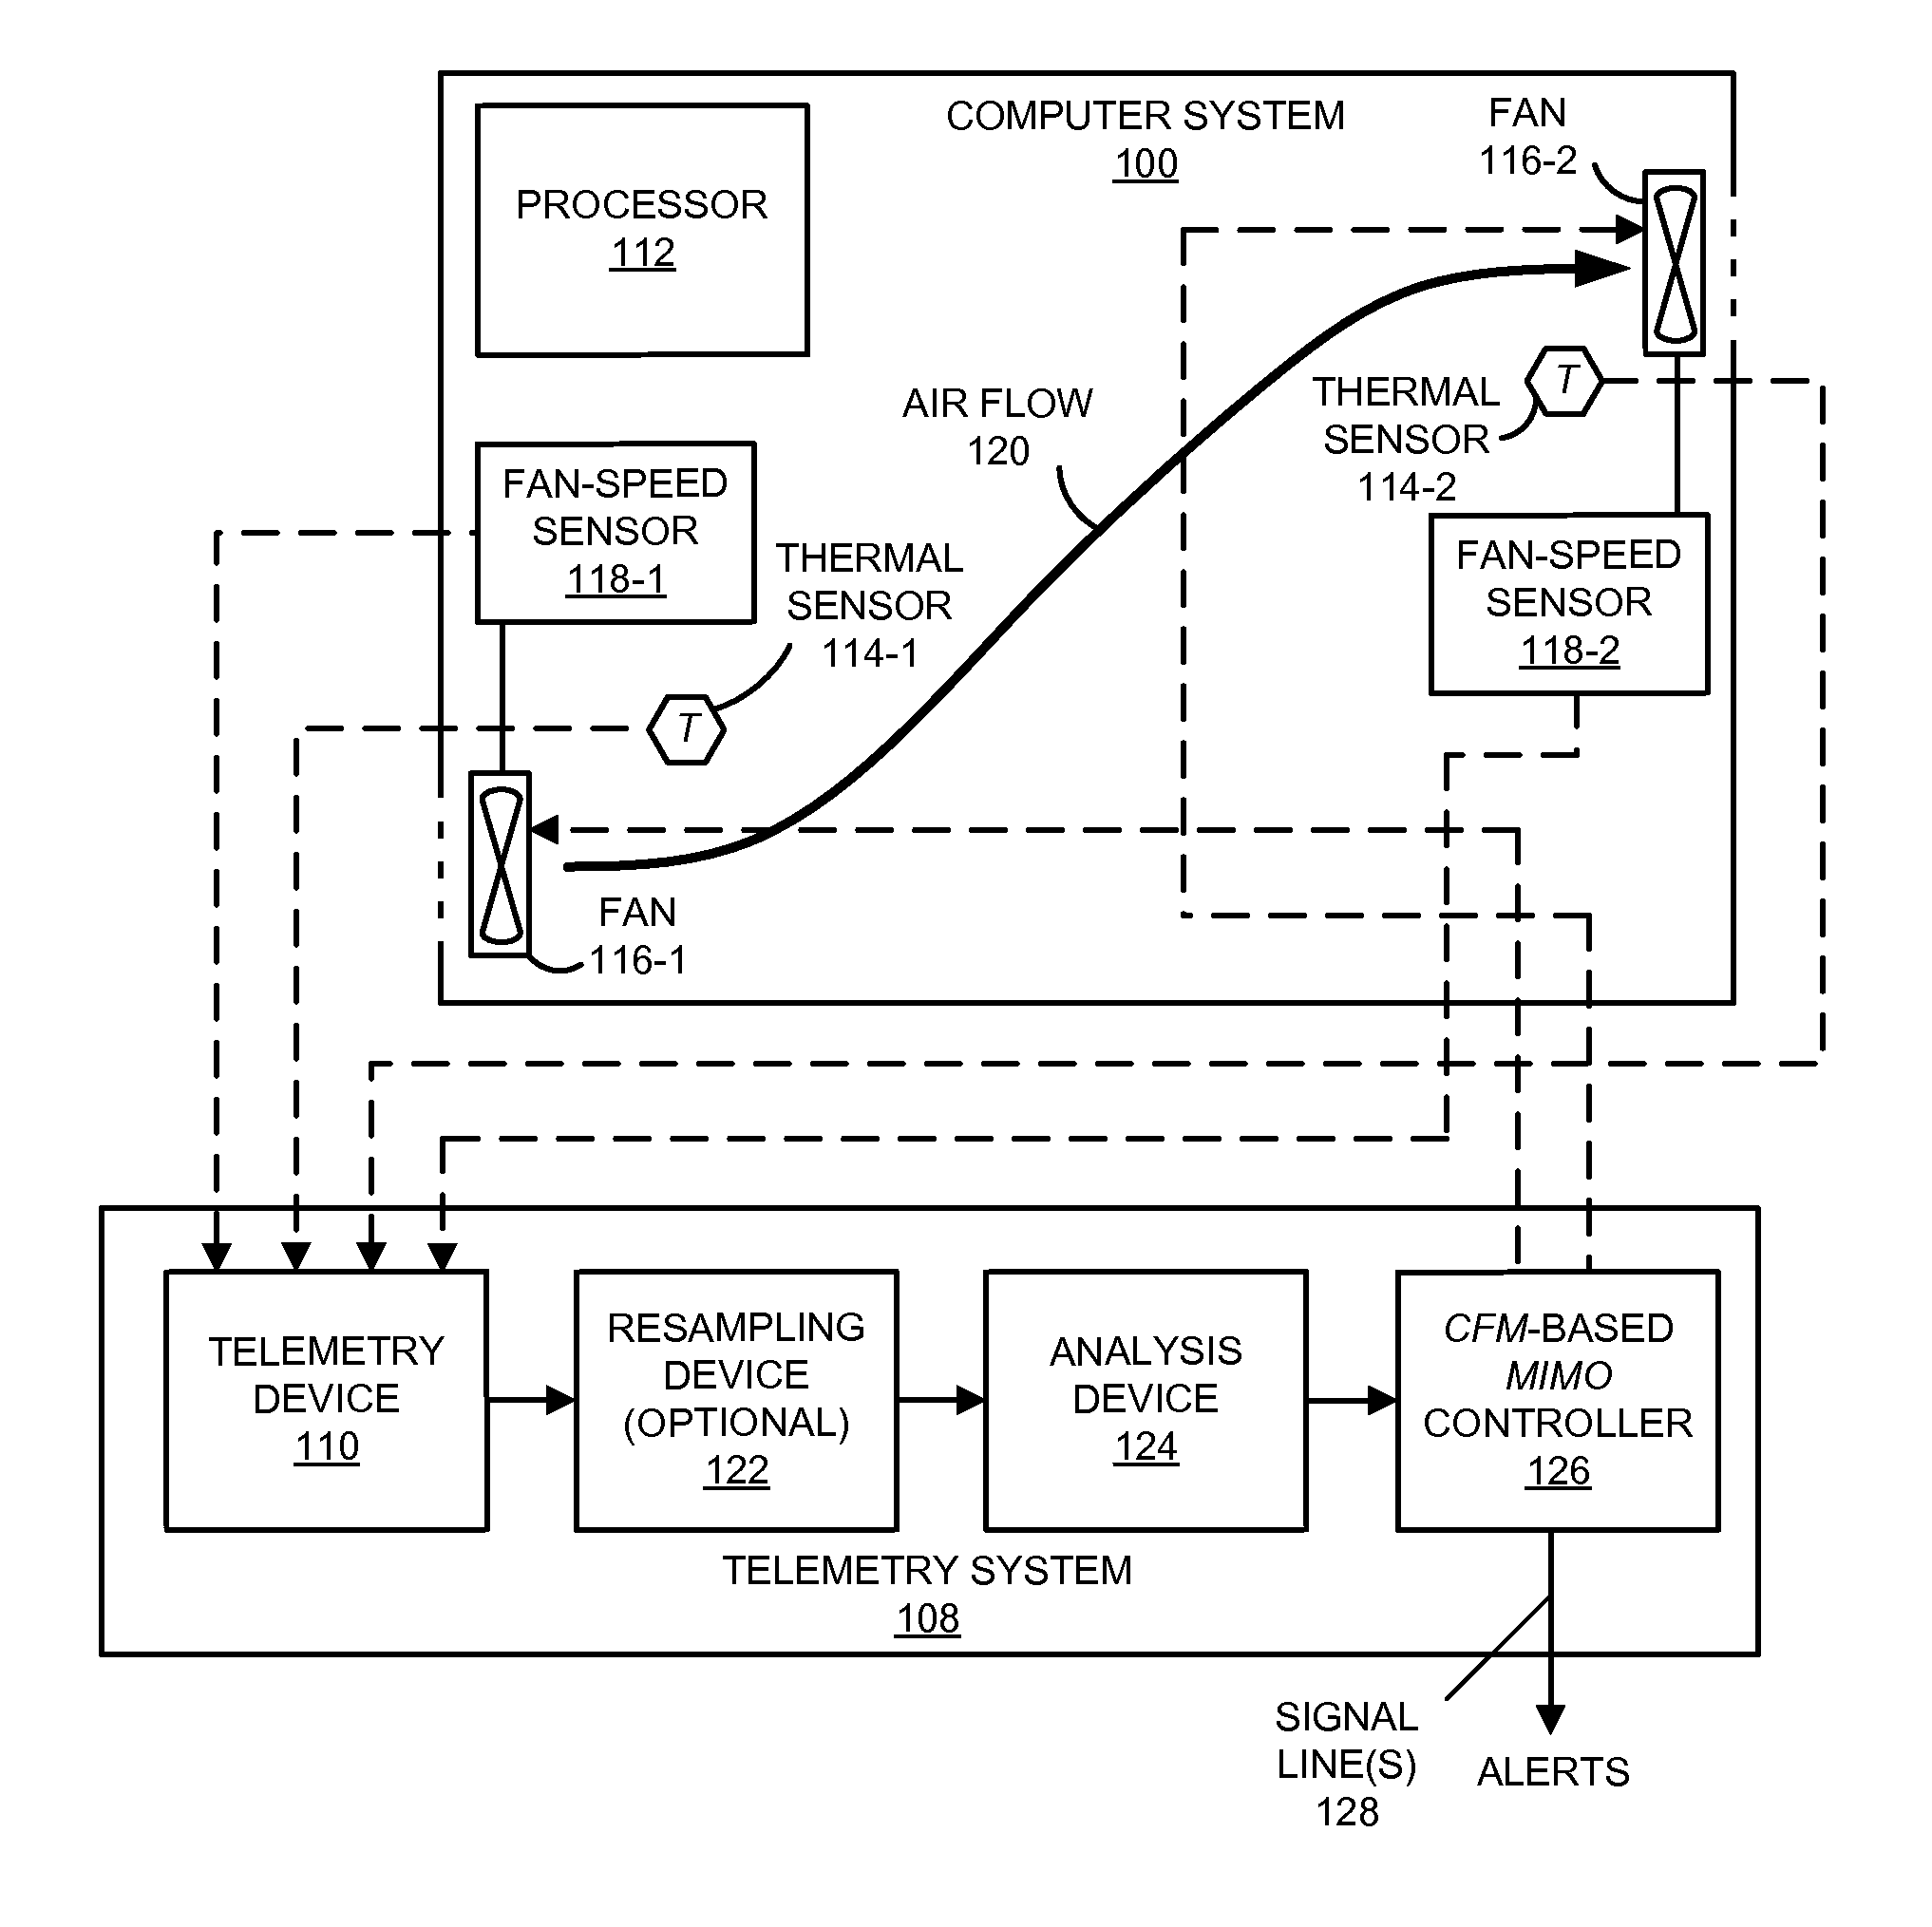 Cooling-control technique for use in a computer system